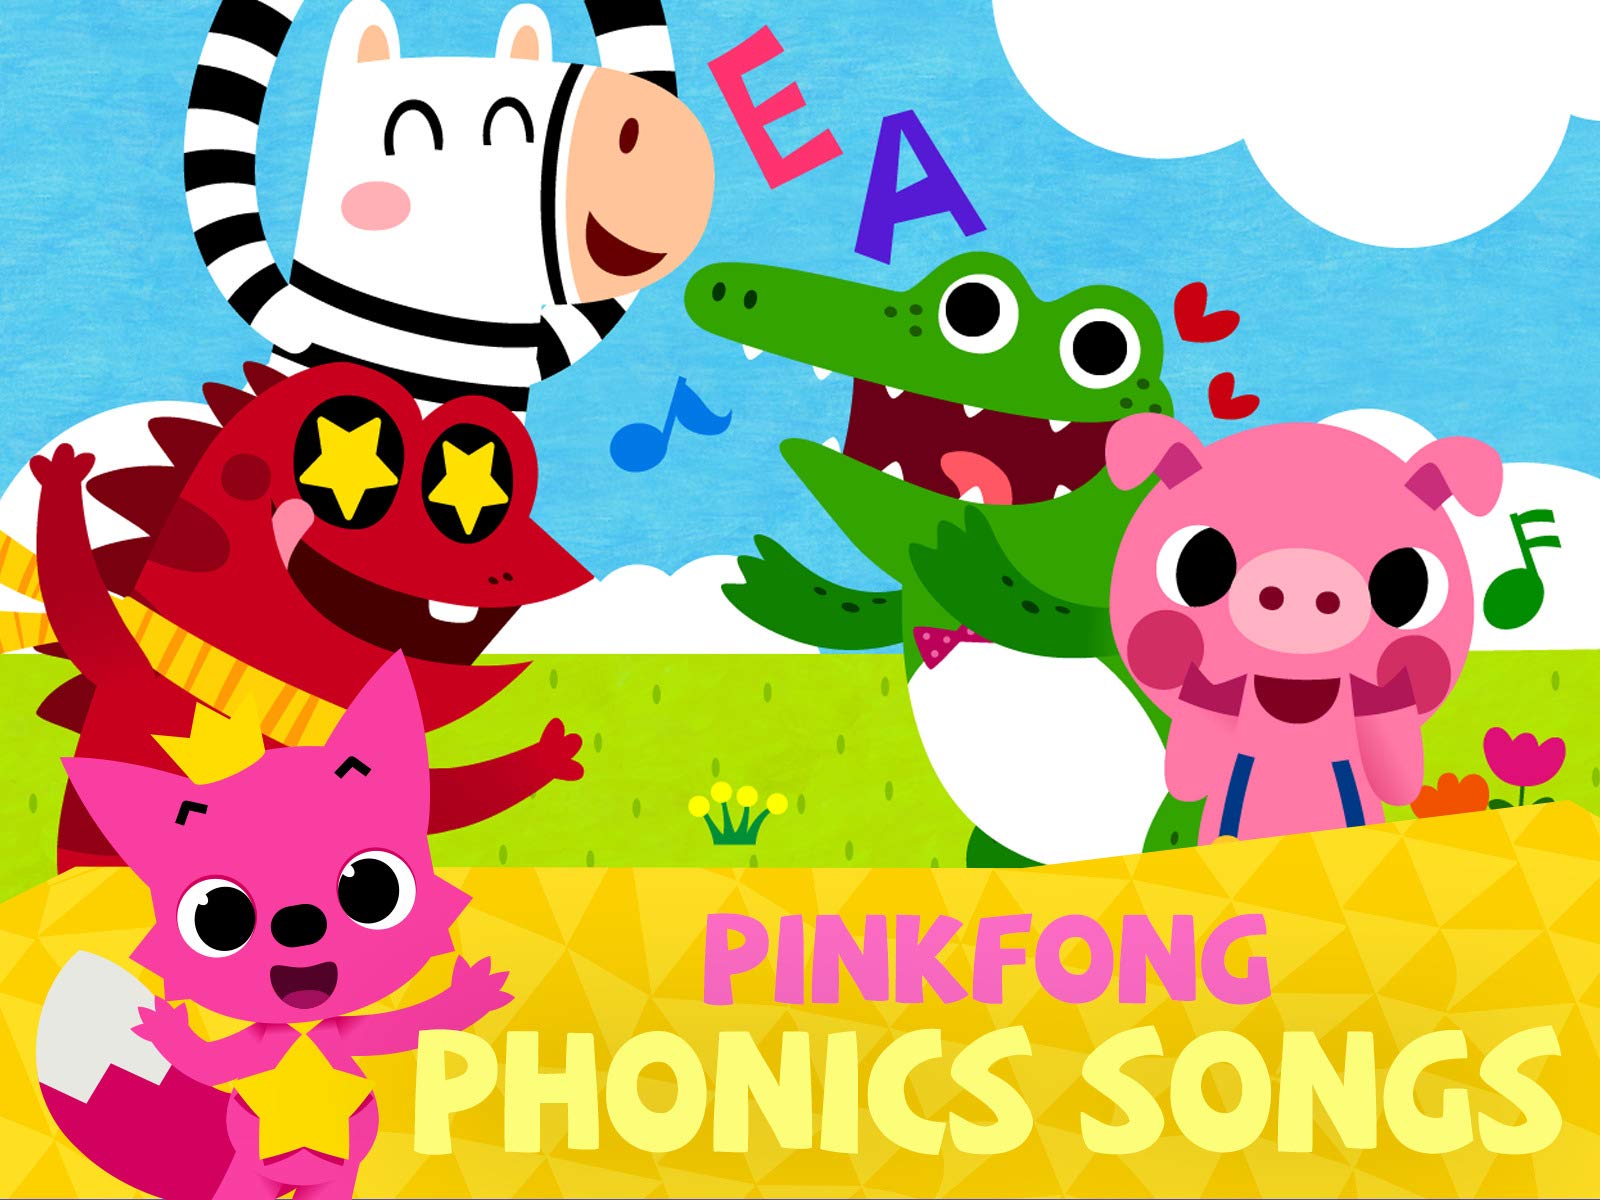 Pinkfong Wallpapers - Wallpaper Cave